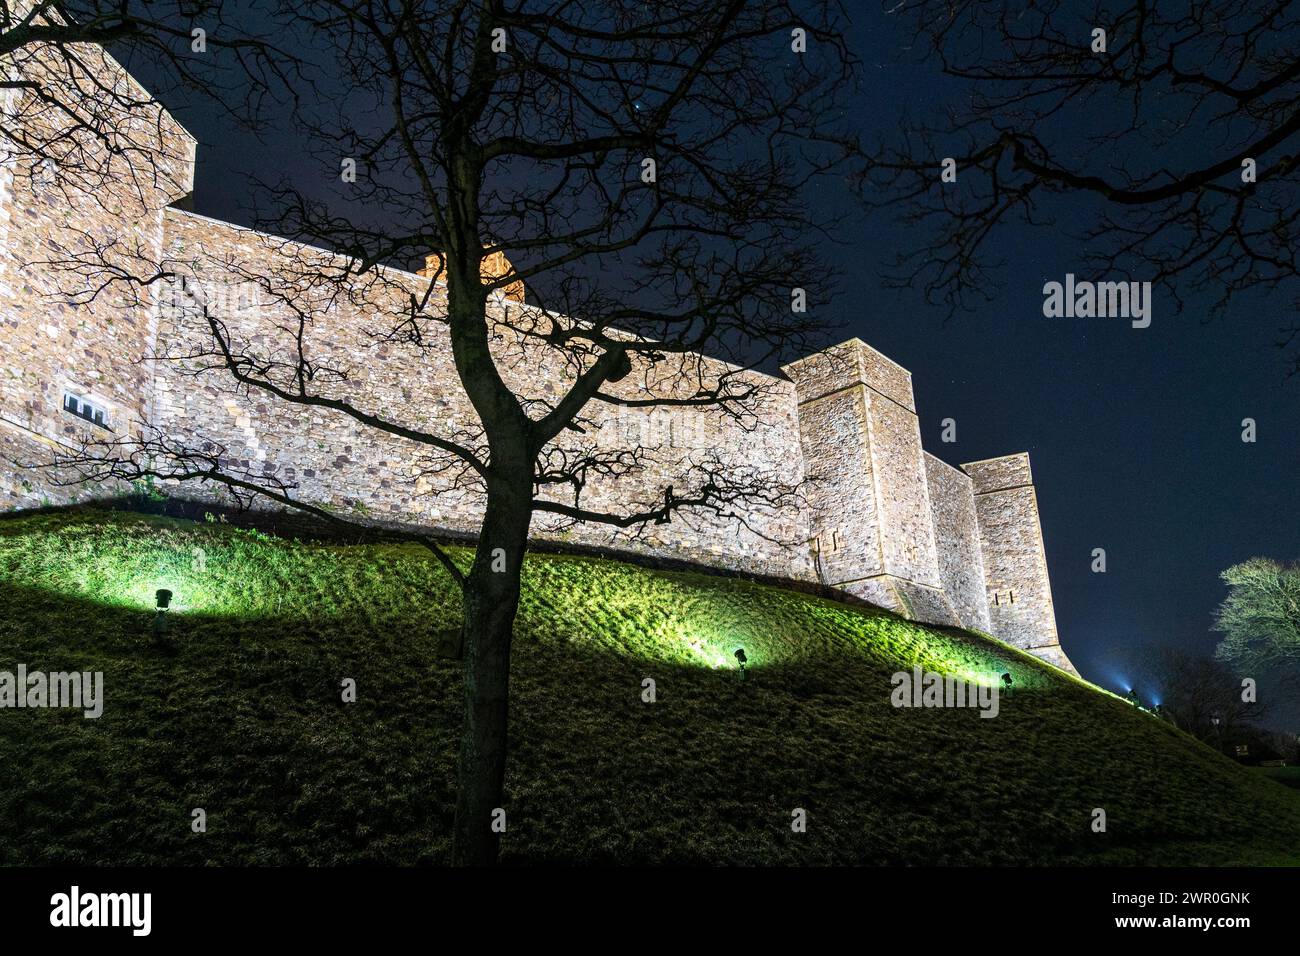 Dover castle at night. The embankment and curtain wall surrounding the main keep illuminated by spotlights. Silhouette of tree in foreground. Stock Photo